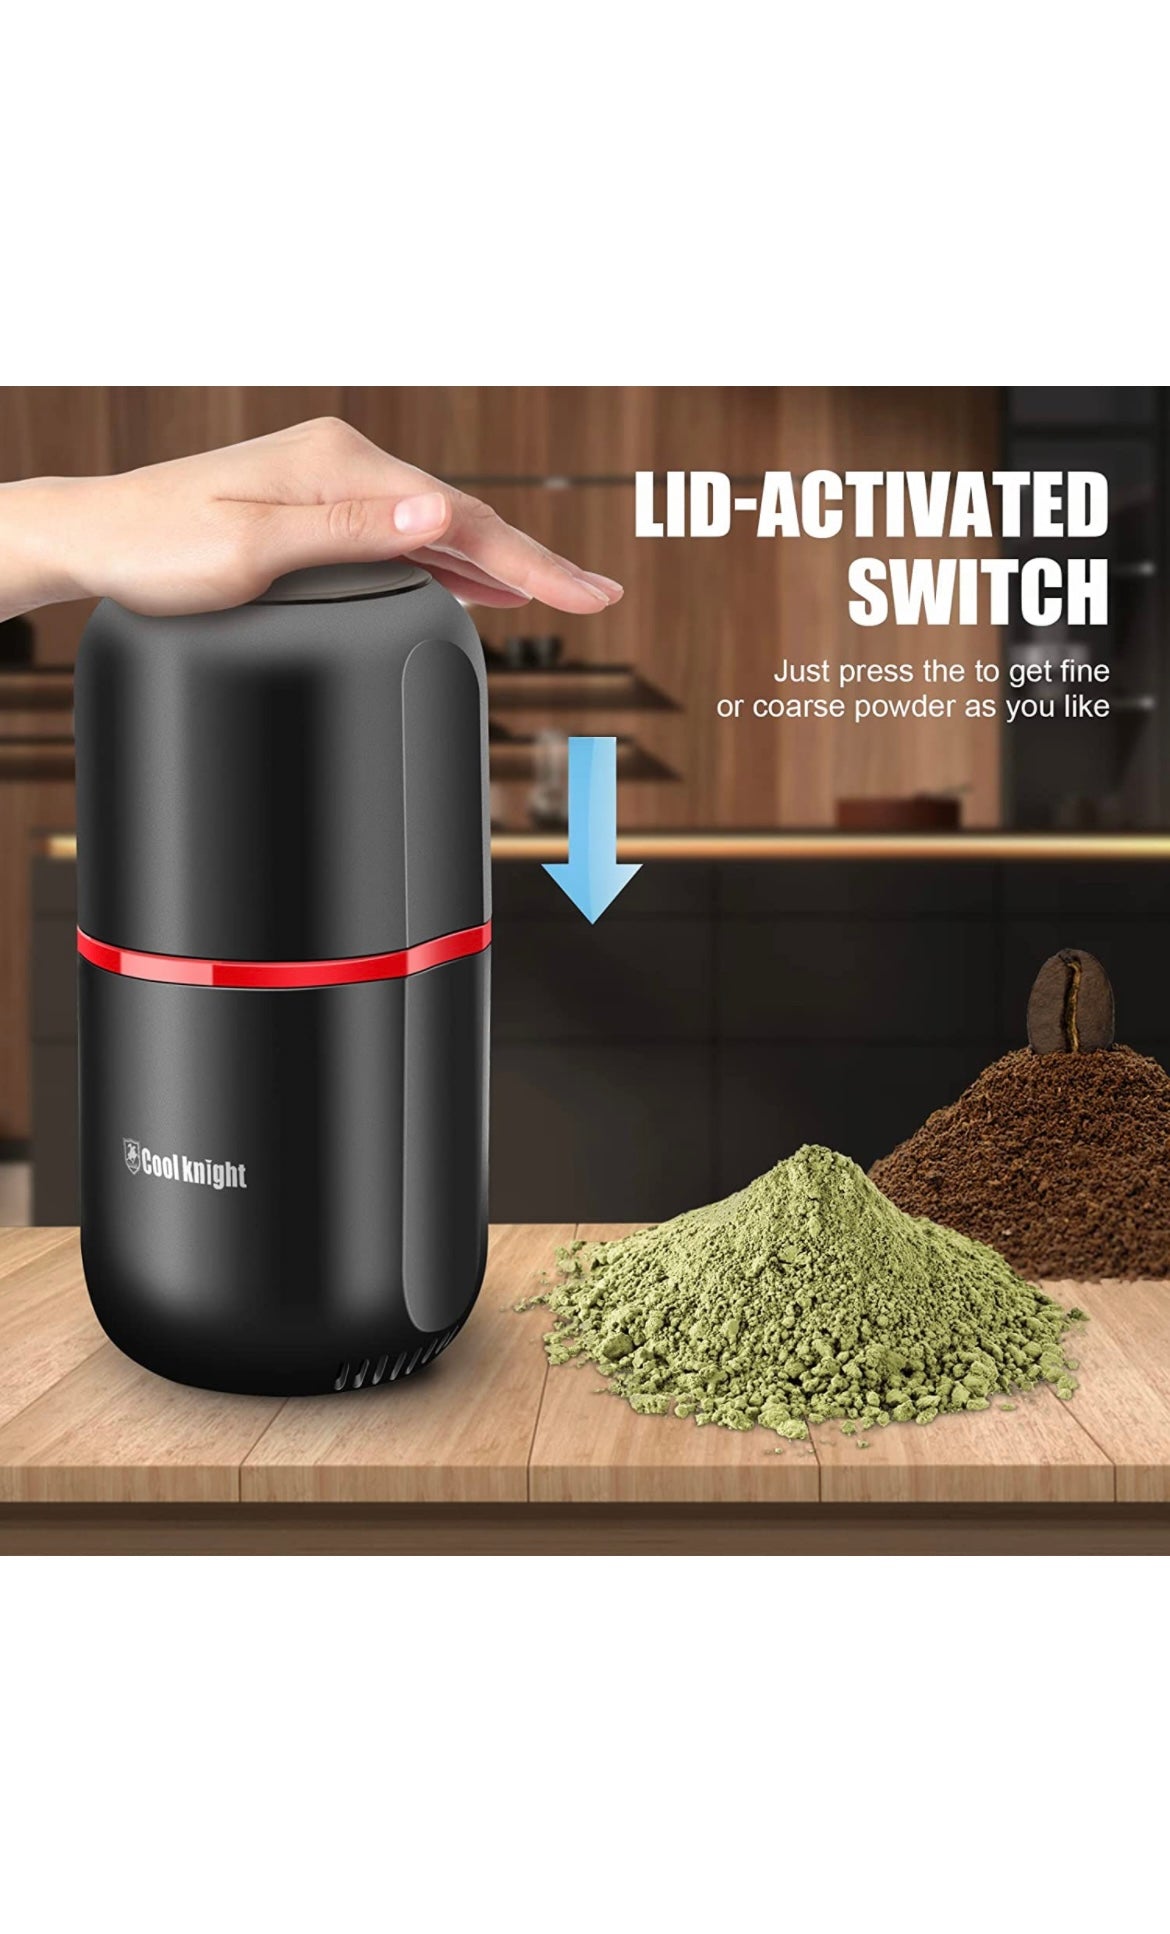 Cool Knight Adjustable Coffee Grinder Electric, with Timing Setting and Removable Stainless Steel Bowl, Herb Spice Grinder Great for Coffee Bean